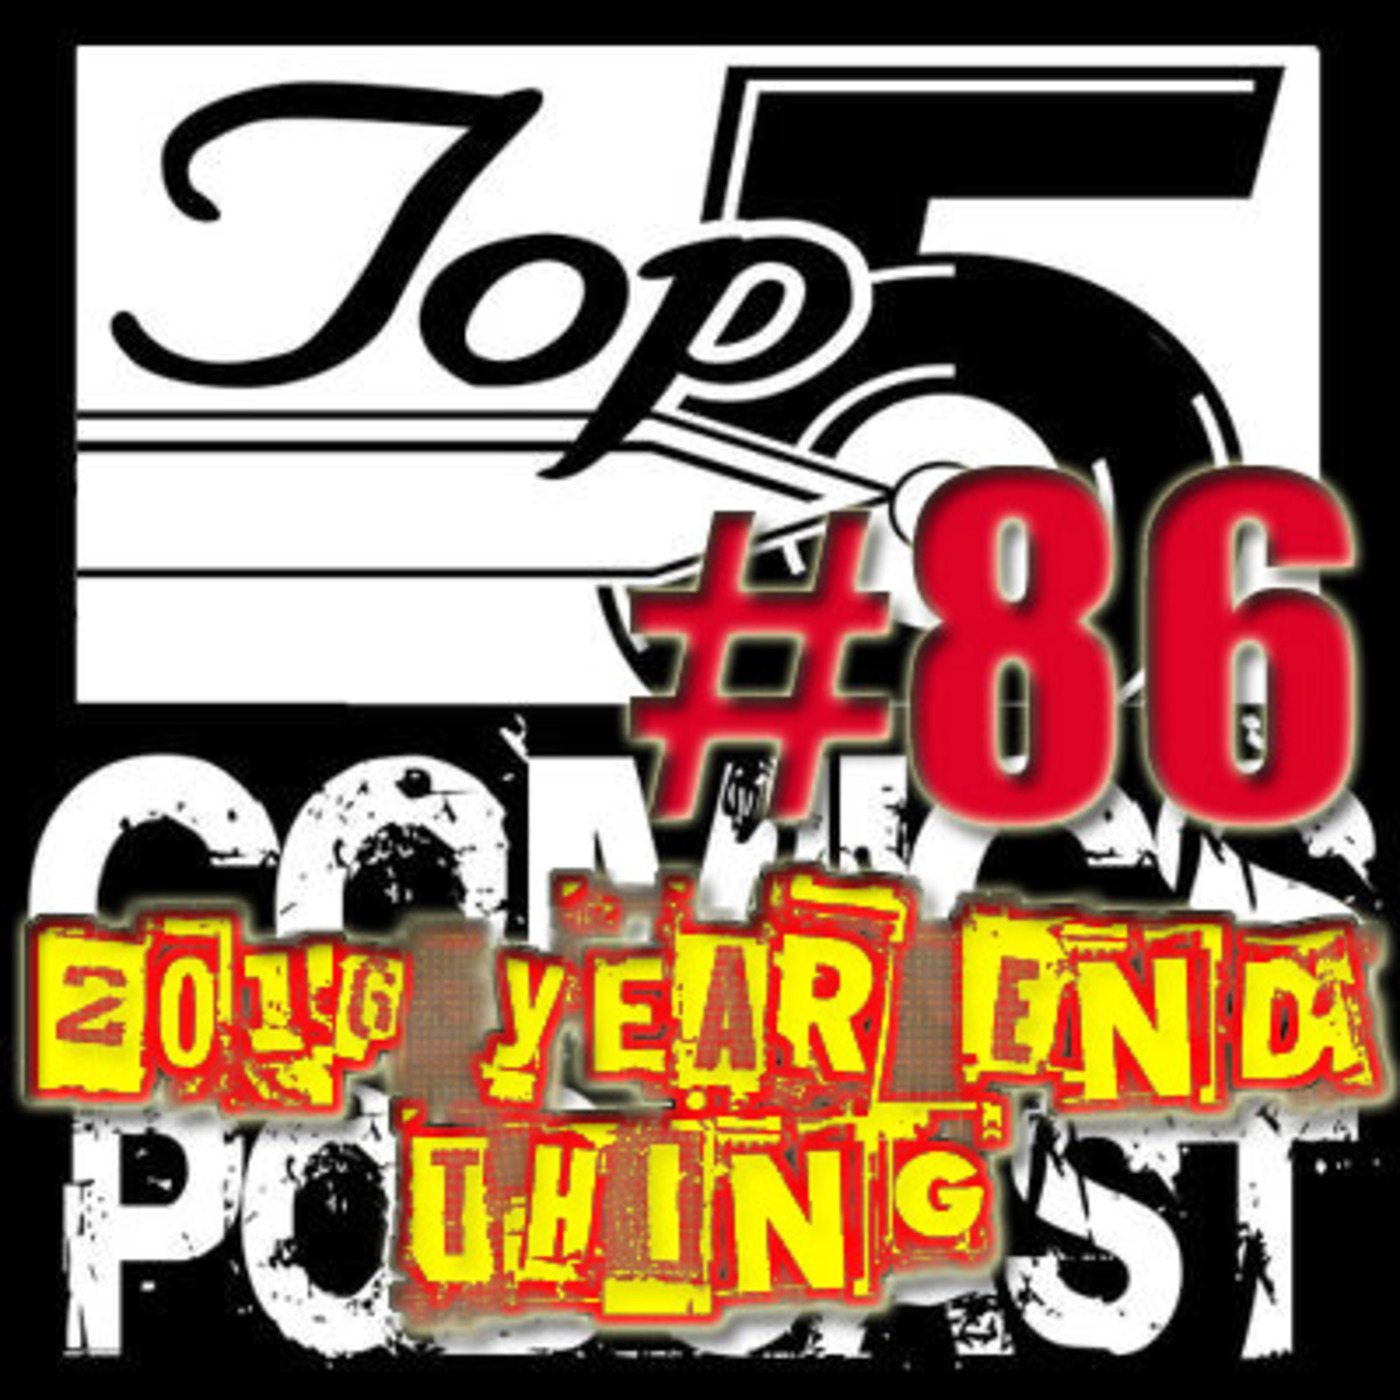 Top 5 Comics Podcast Ep. 86 - Season 4 2016 Year End Thing